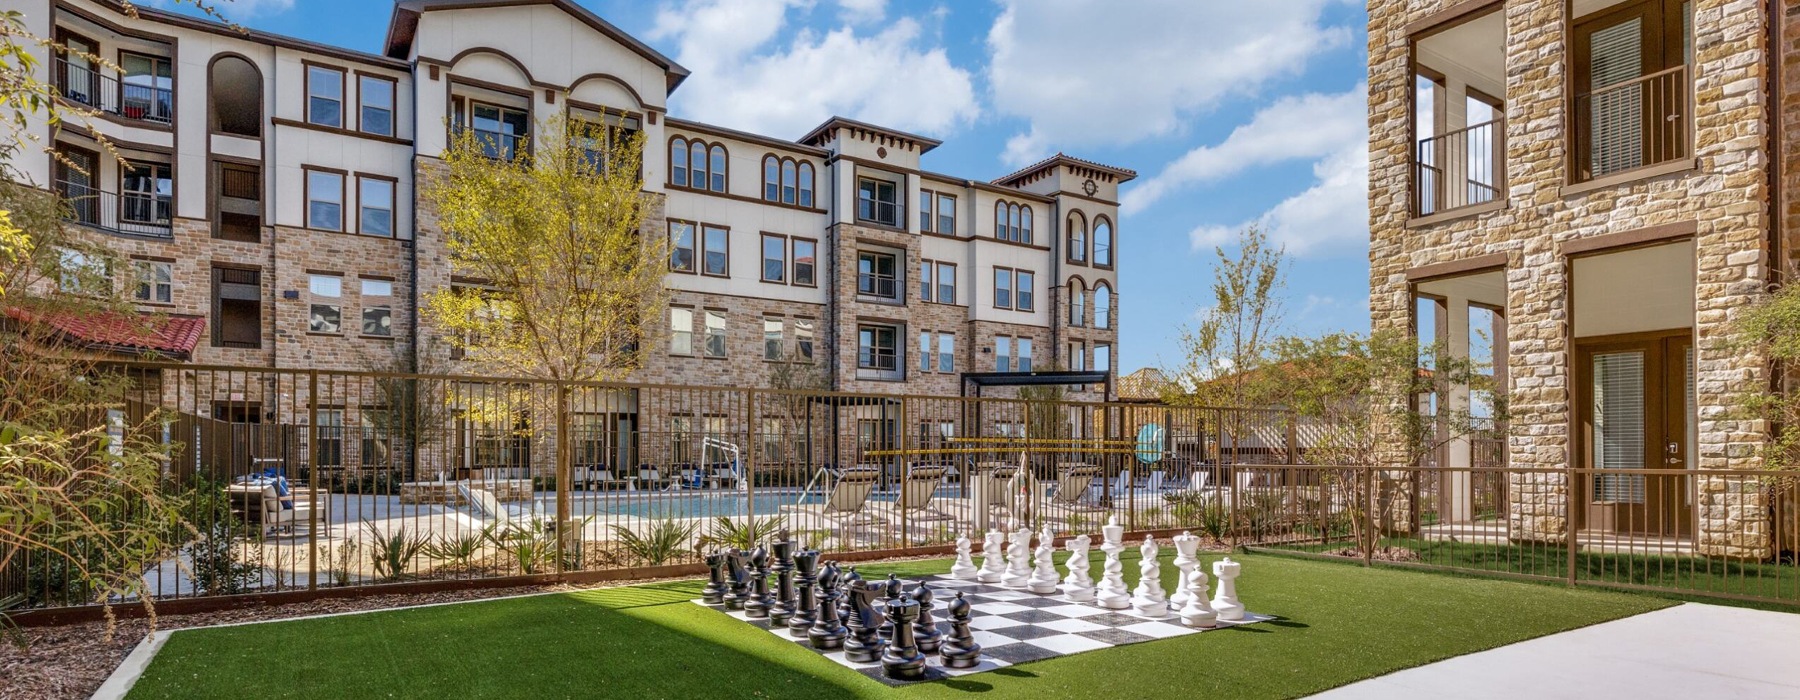 Spacious courtyard with massive chessboard